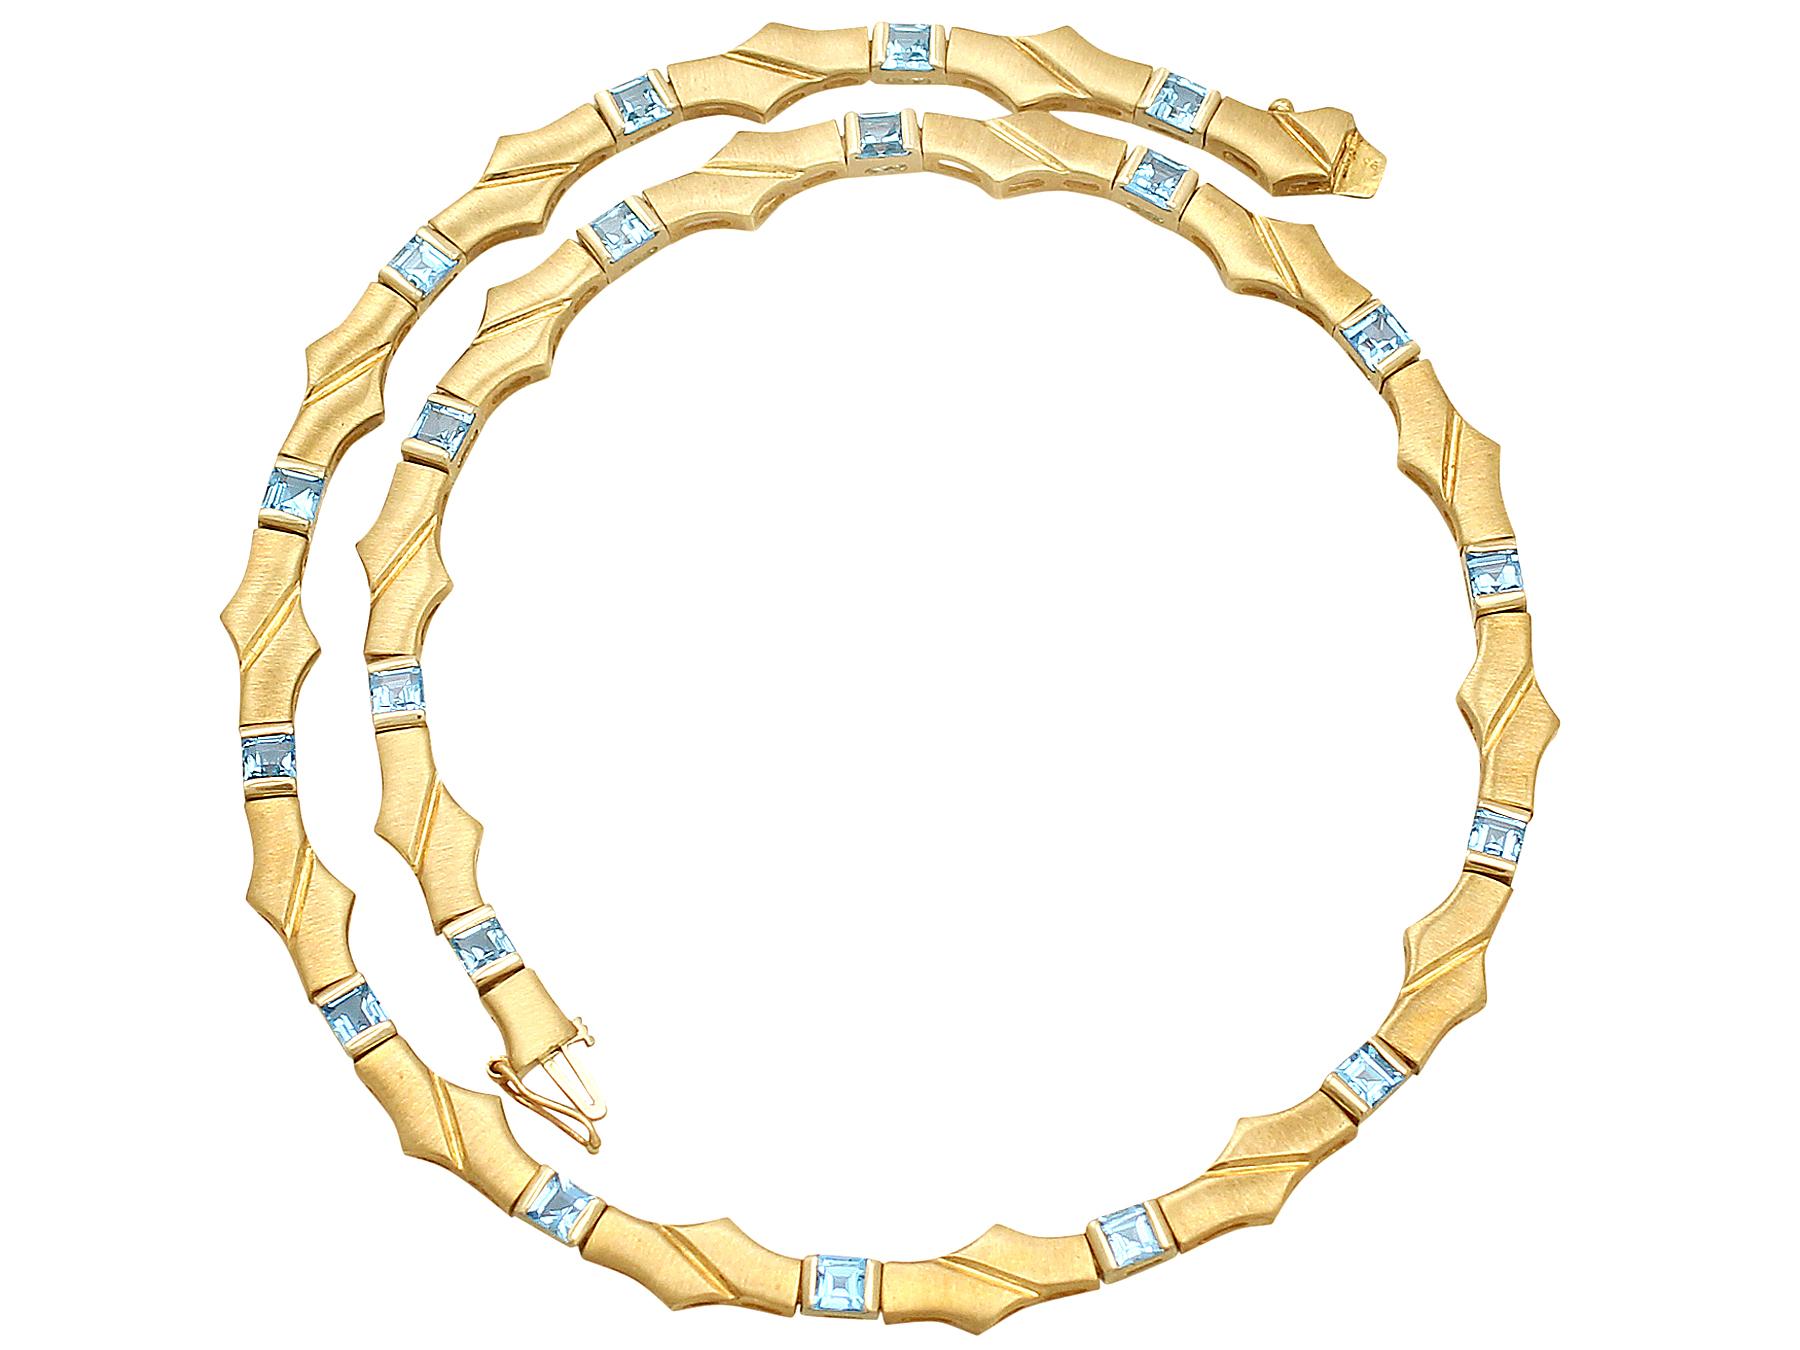 A fine vintage natural blue topaz, 9 karat yellow gold necklace; part of our vintage jewelry and estate jewelry collections.

This fine vintage topaz necklace has twenty pierced decorated articulated links crafted in 9k yellow gold with a satin